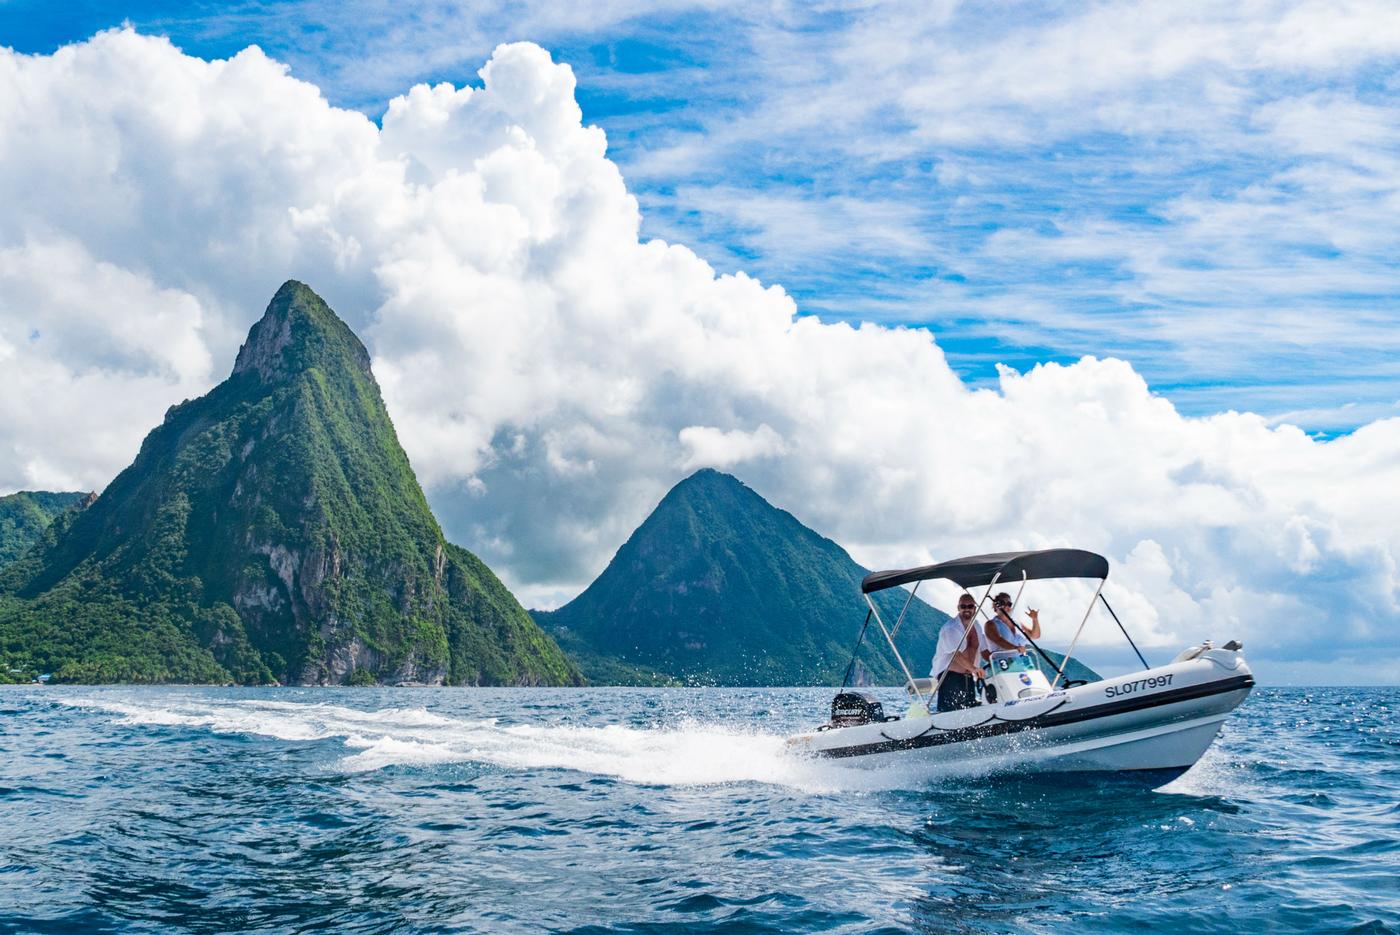 guests ridin speed boat alond st. lucia's coast